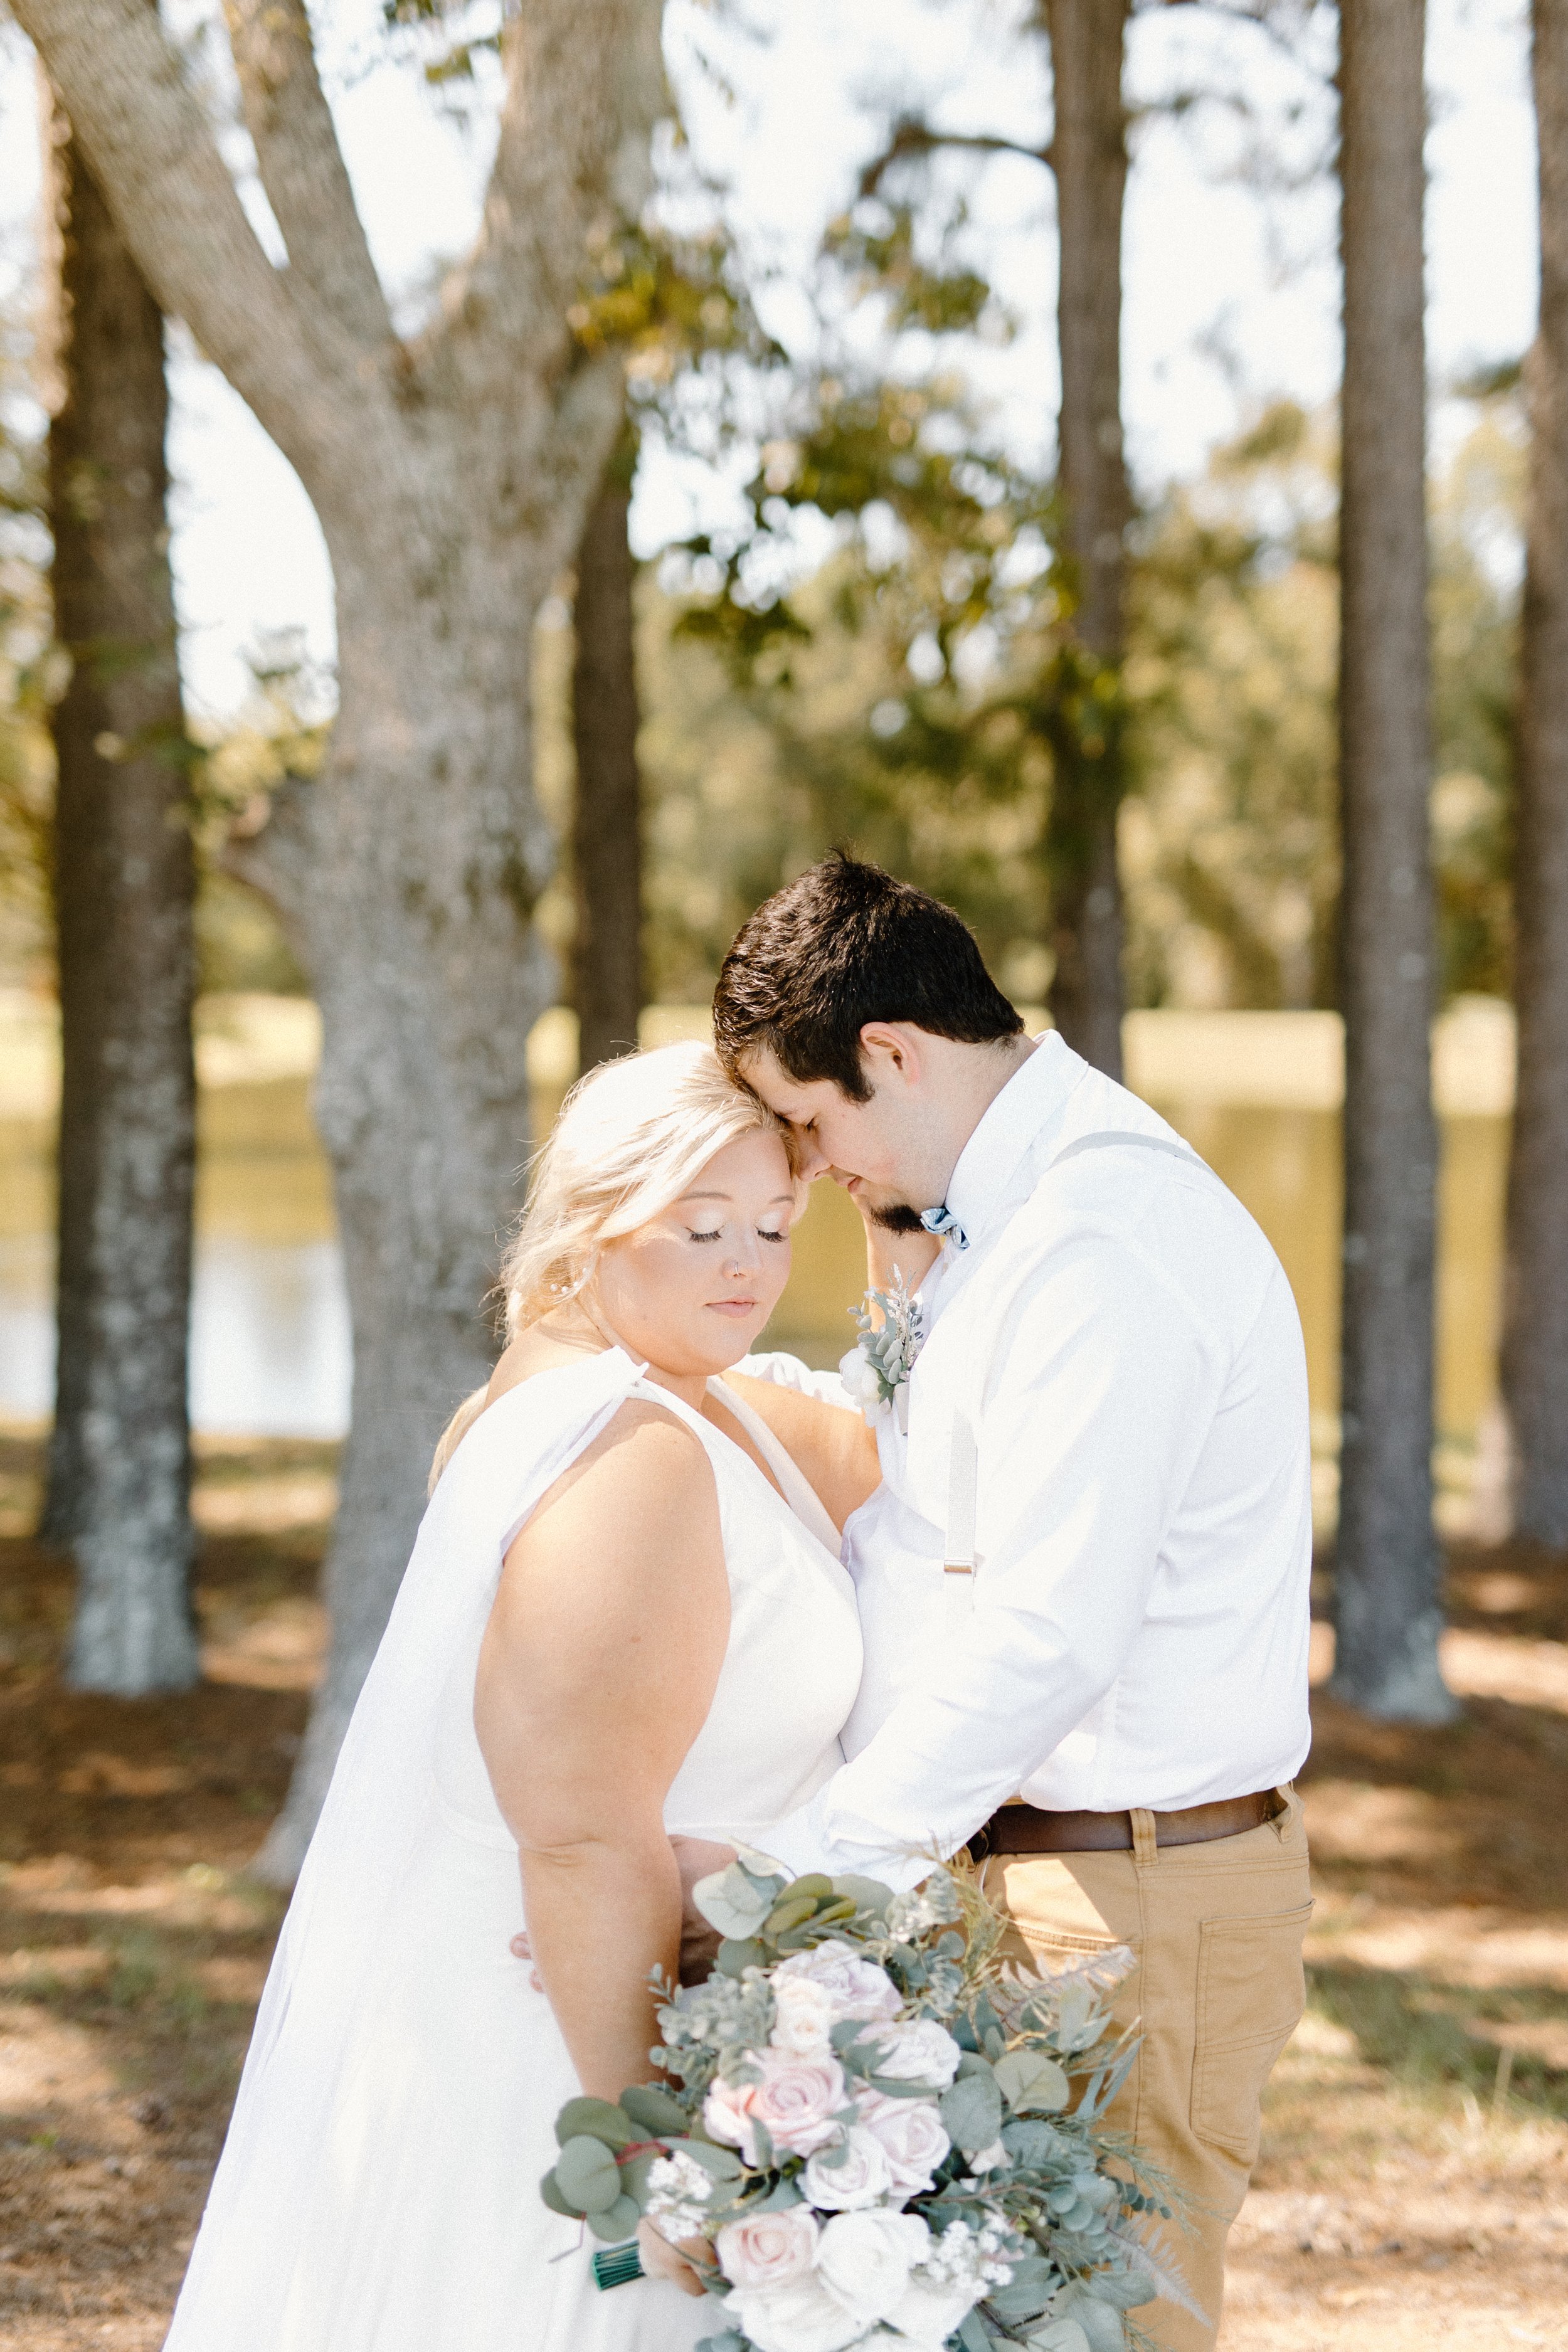 ivory-and-beau-blog-down-for-the-gown-ashley-real-bride-made-with-love-bridal-wedding-dress-bridal-gown-wedding-gown-southern-bride-savannah-bridal-shop-ivory-and-beau-bride-savannah-georgia-MY5A6838.jpg